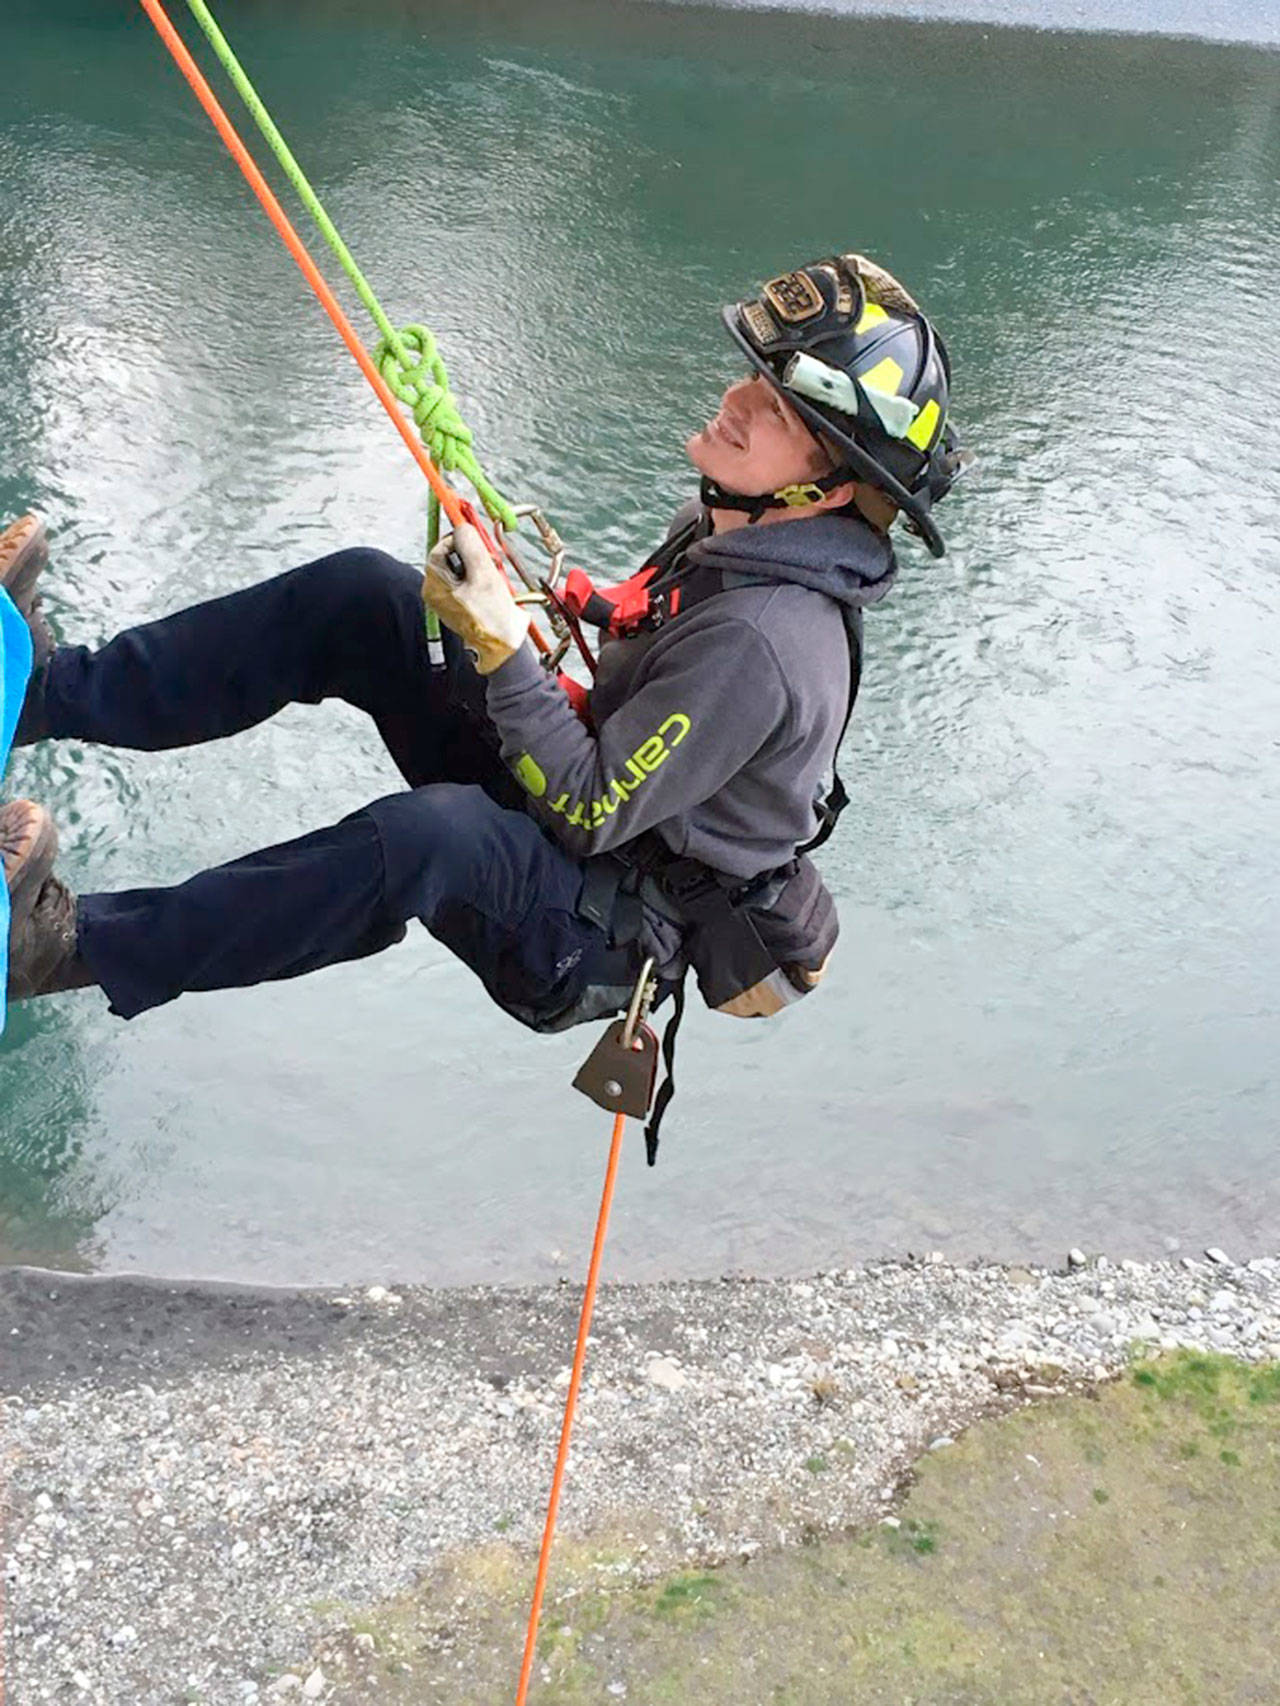 Firefighter/EMT Tyler Gear rappels off the Elwha River Bridge during technical rescue training.